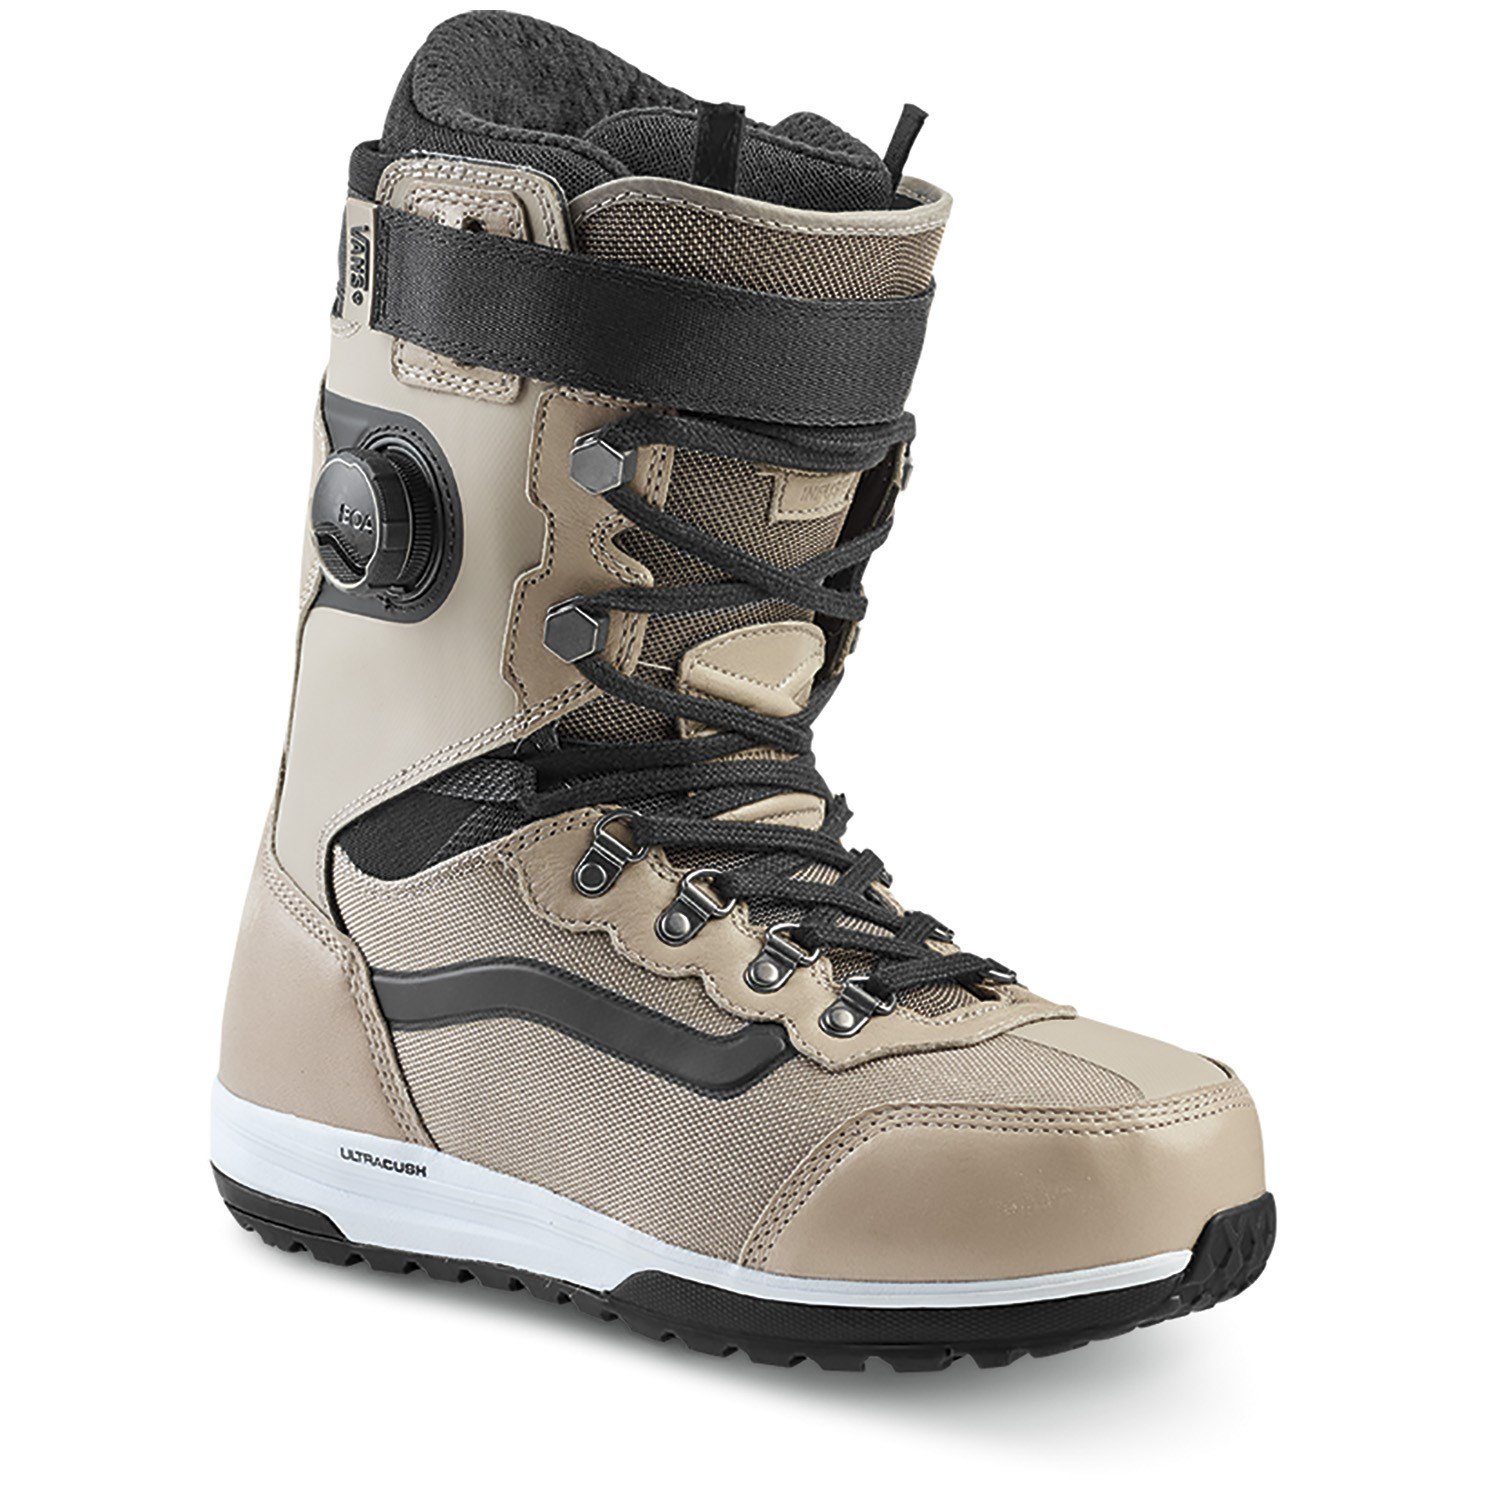 vans snowboard boots infuse